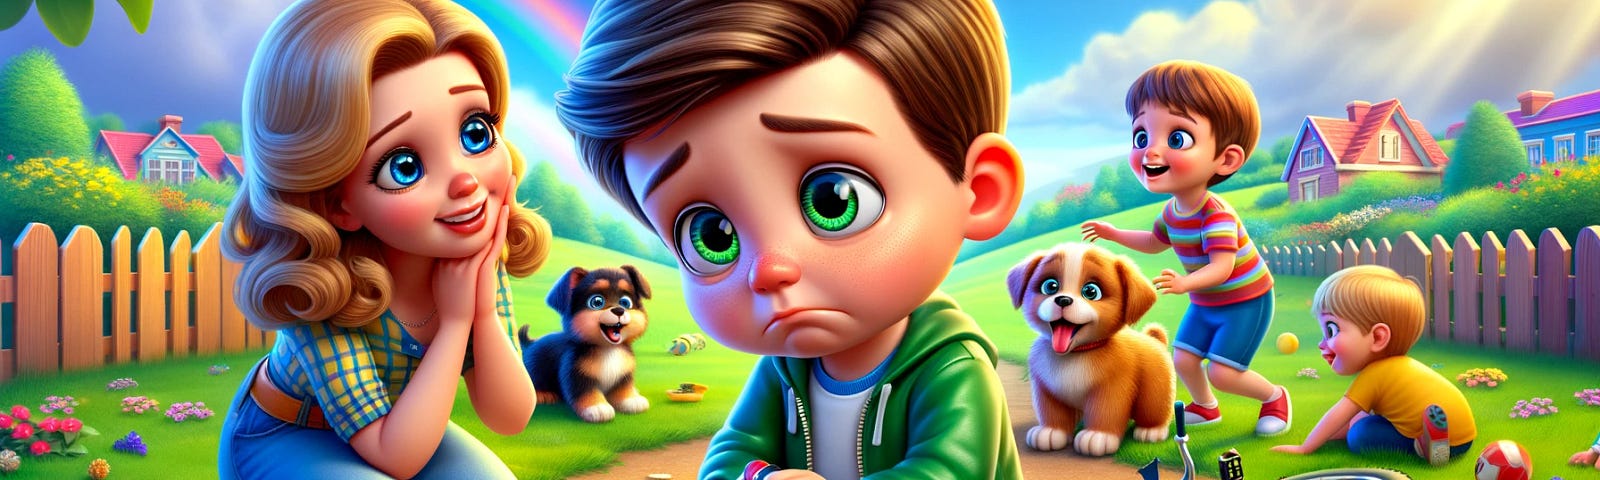 A young boy named Tommy looks sad as he stares at his broken toy, with his mum kneeling beside him, smiling warmly. Around them are a shiny bike, a playful puppy, and children playing outside. The scene is vibrant and colourful, featuring green grass, blue skies, and a rainbow, capturing a moment of joy and wonder.